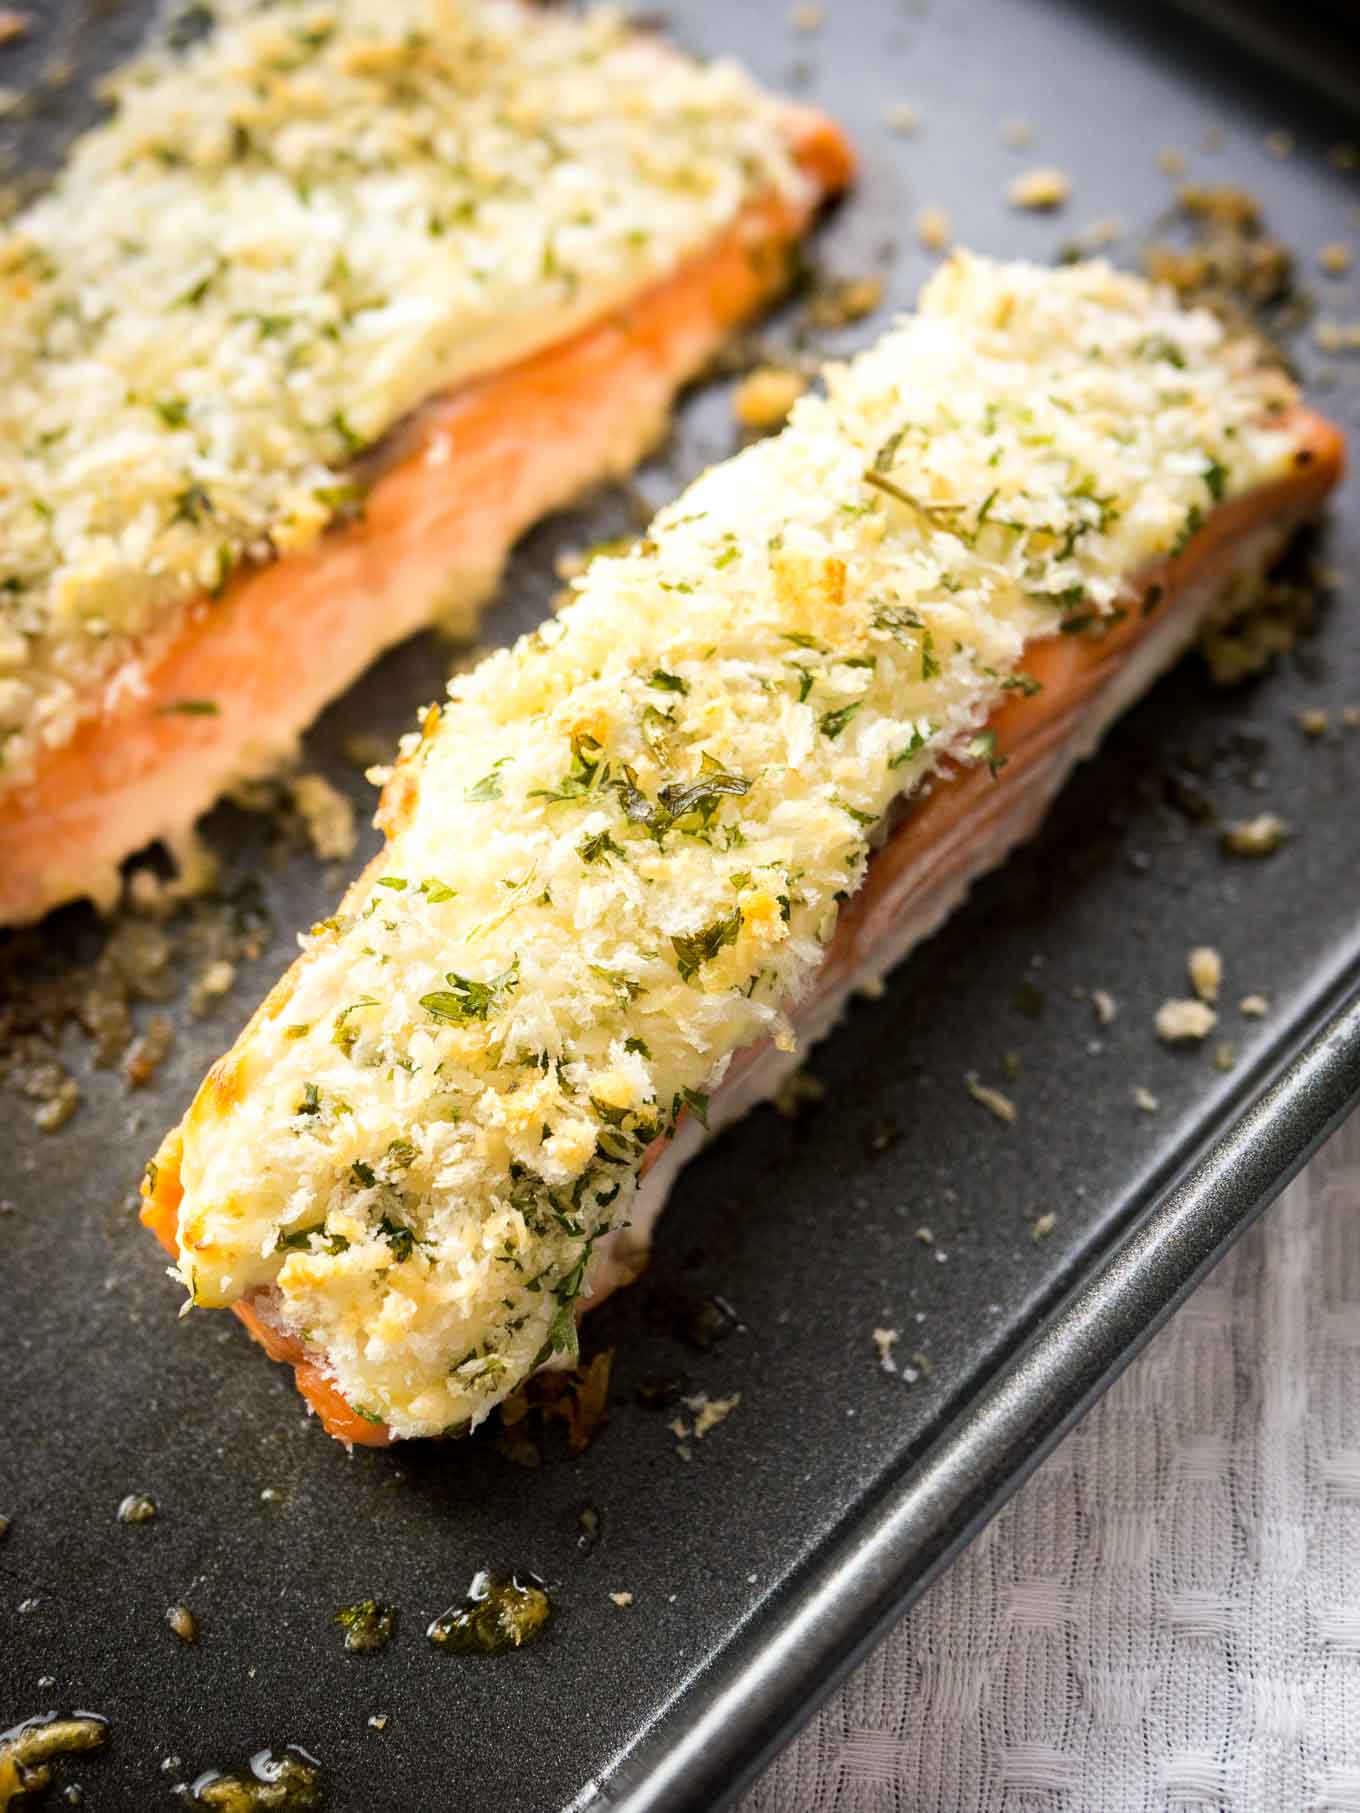 This Horseradish Parmesan crusted Salmon is baked in the oven and only takes 20 minutes to make. A dinner fancy enough for guests but also easy enough for weeknights!